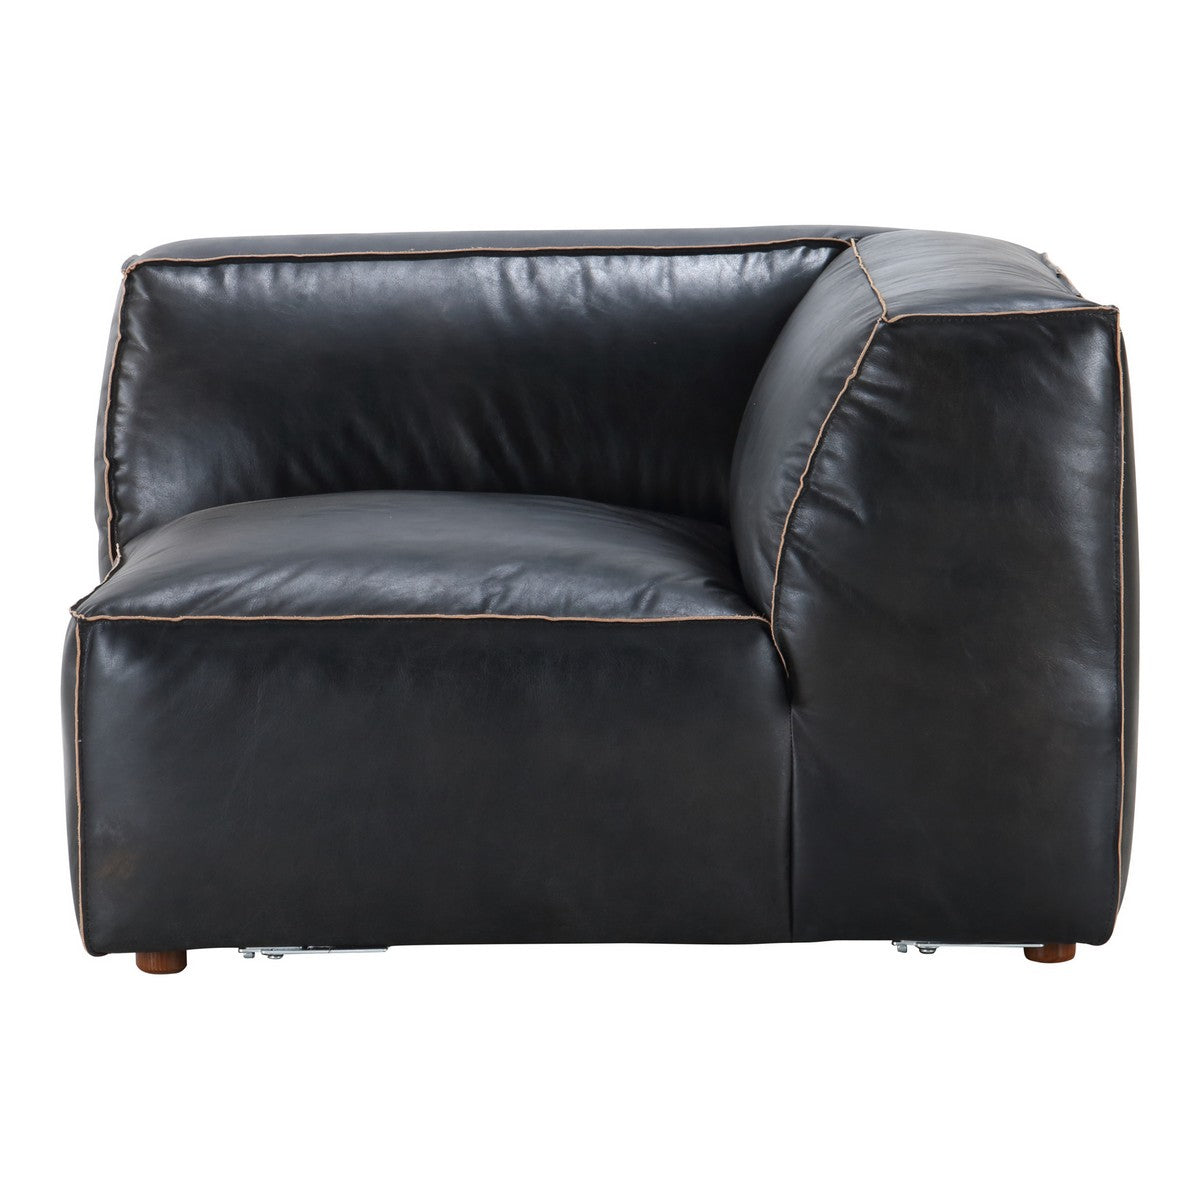 Moe's Home Collection Luxe Corner Chair Antique Black - QN-1021-01 - Moe's Home Collection - Corner Chairs - Minimal And Modern - 1